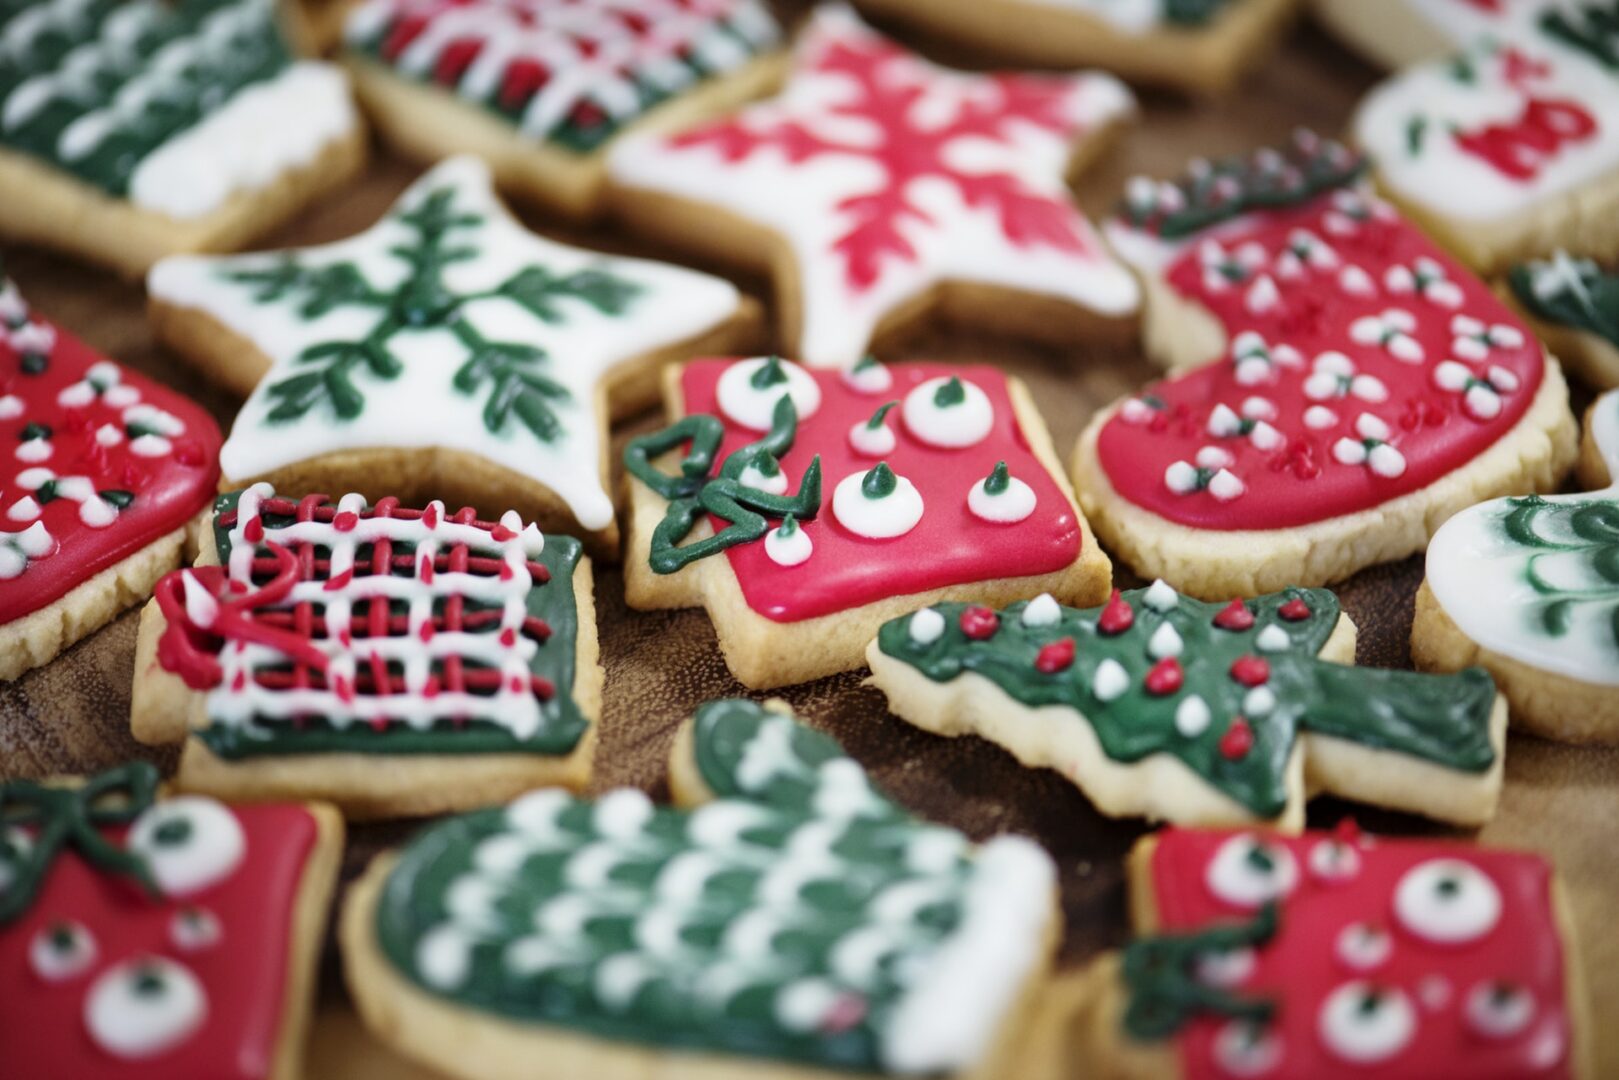 photo of decorated Christmas cookies